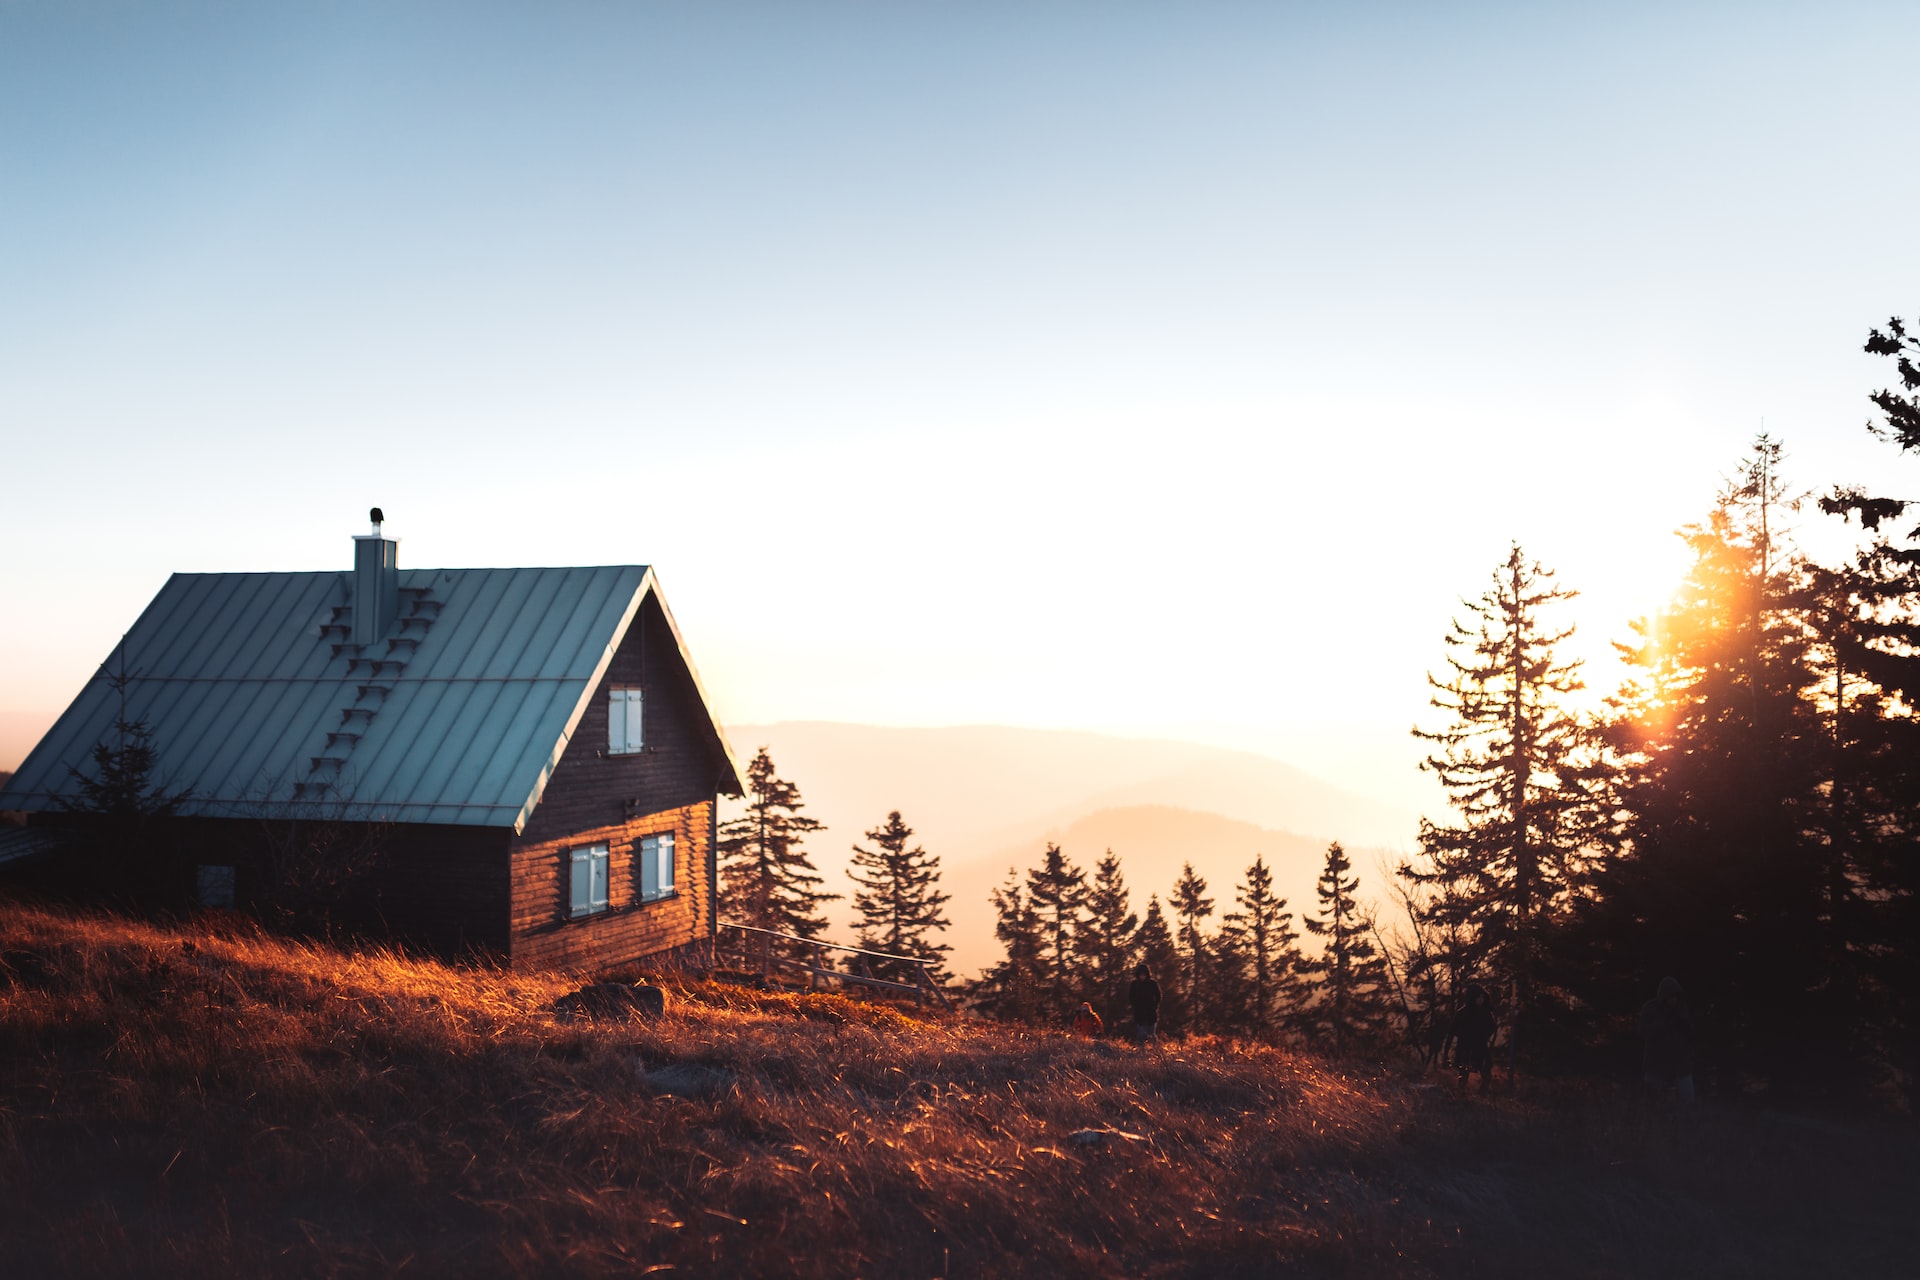 A mountainside cabin bathed in golden light.